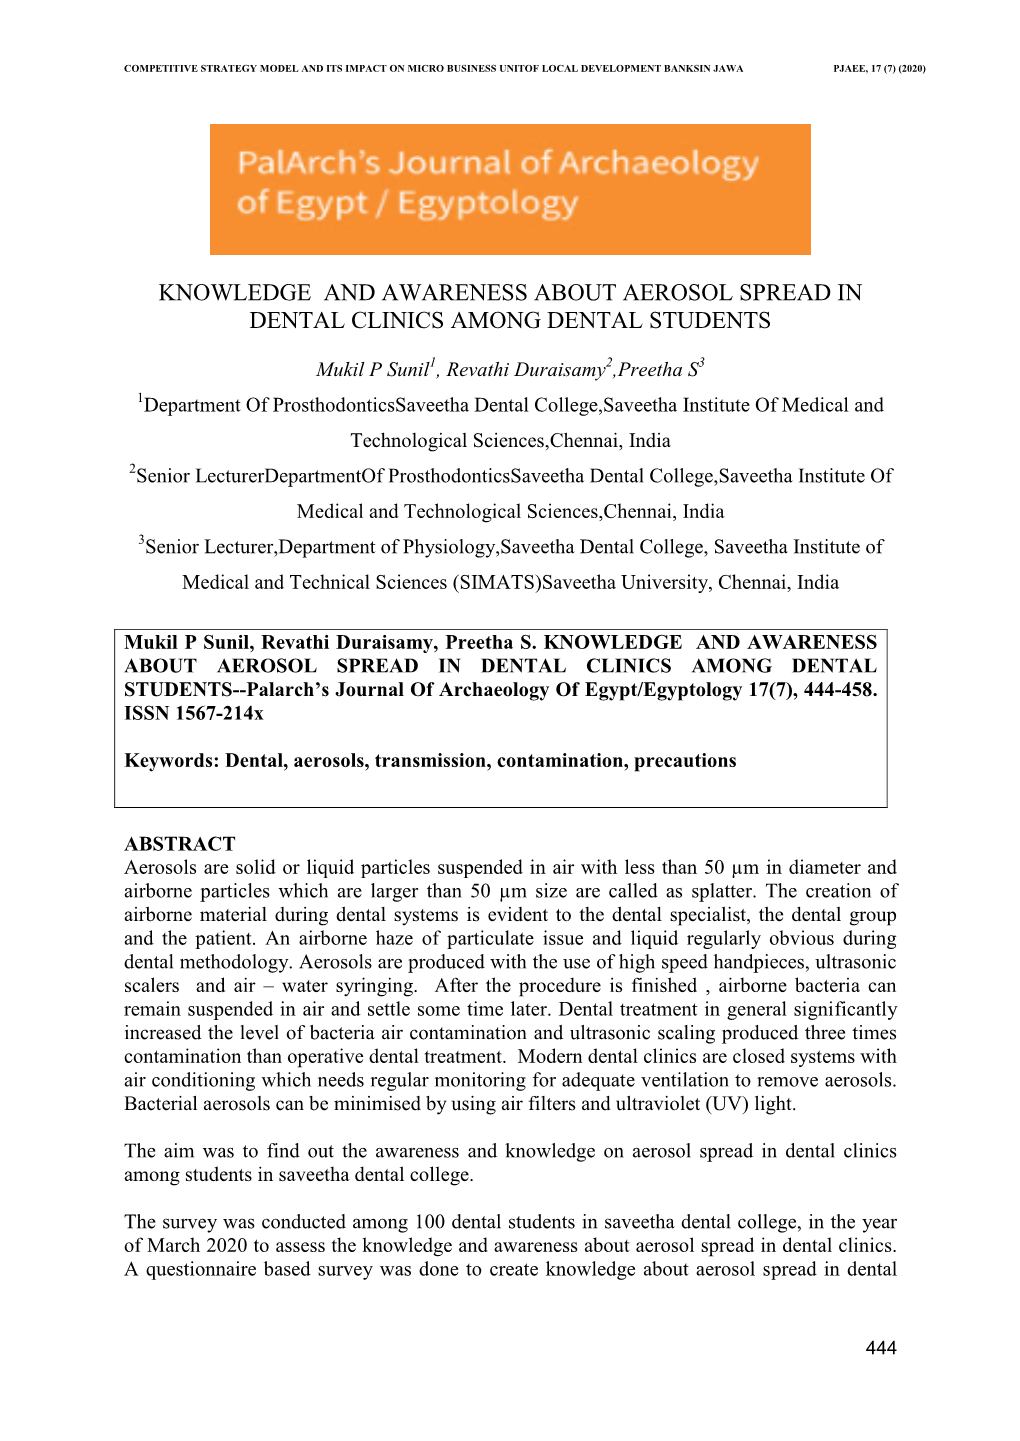 Knowledge and Awareness About Aerosol Spread in Dental Clinics Among Dental Students